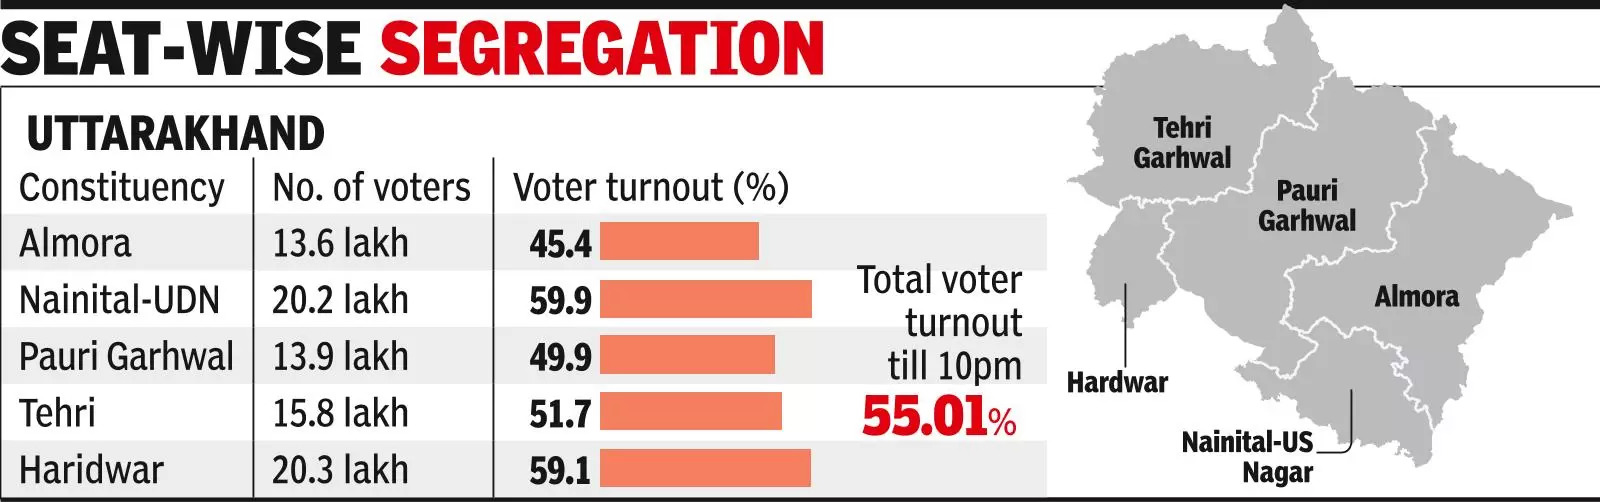 U’khand records 55% voter turnout, 6% dip compared to 2019 LS elections